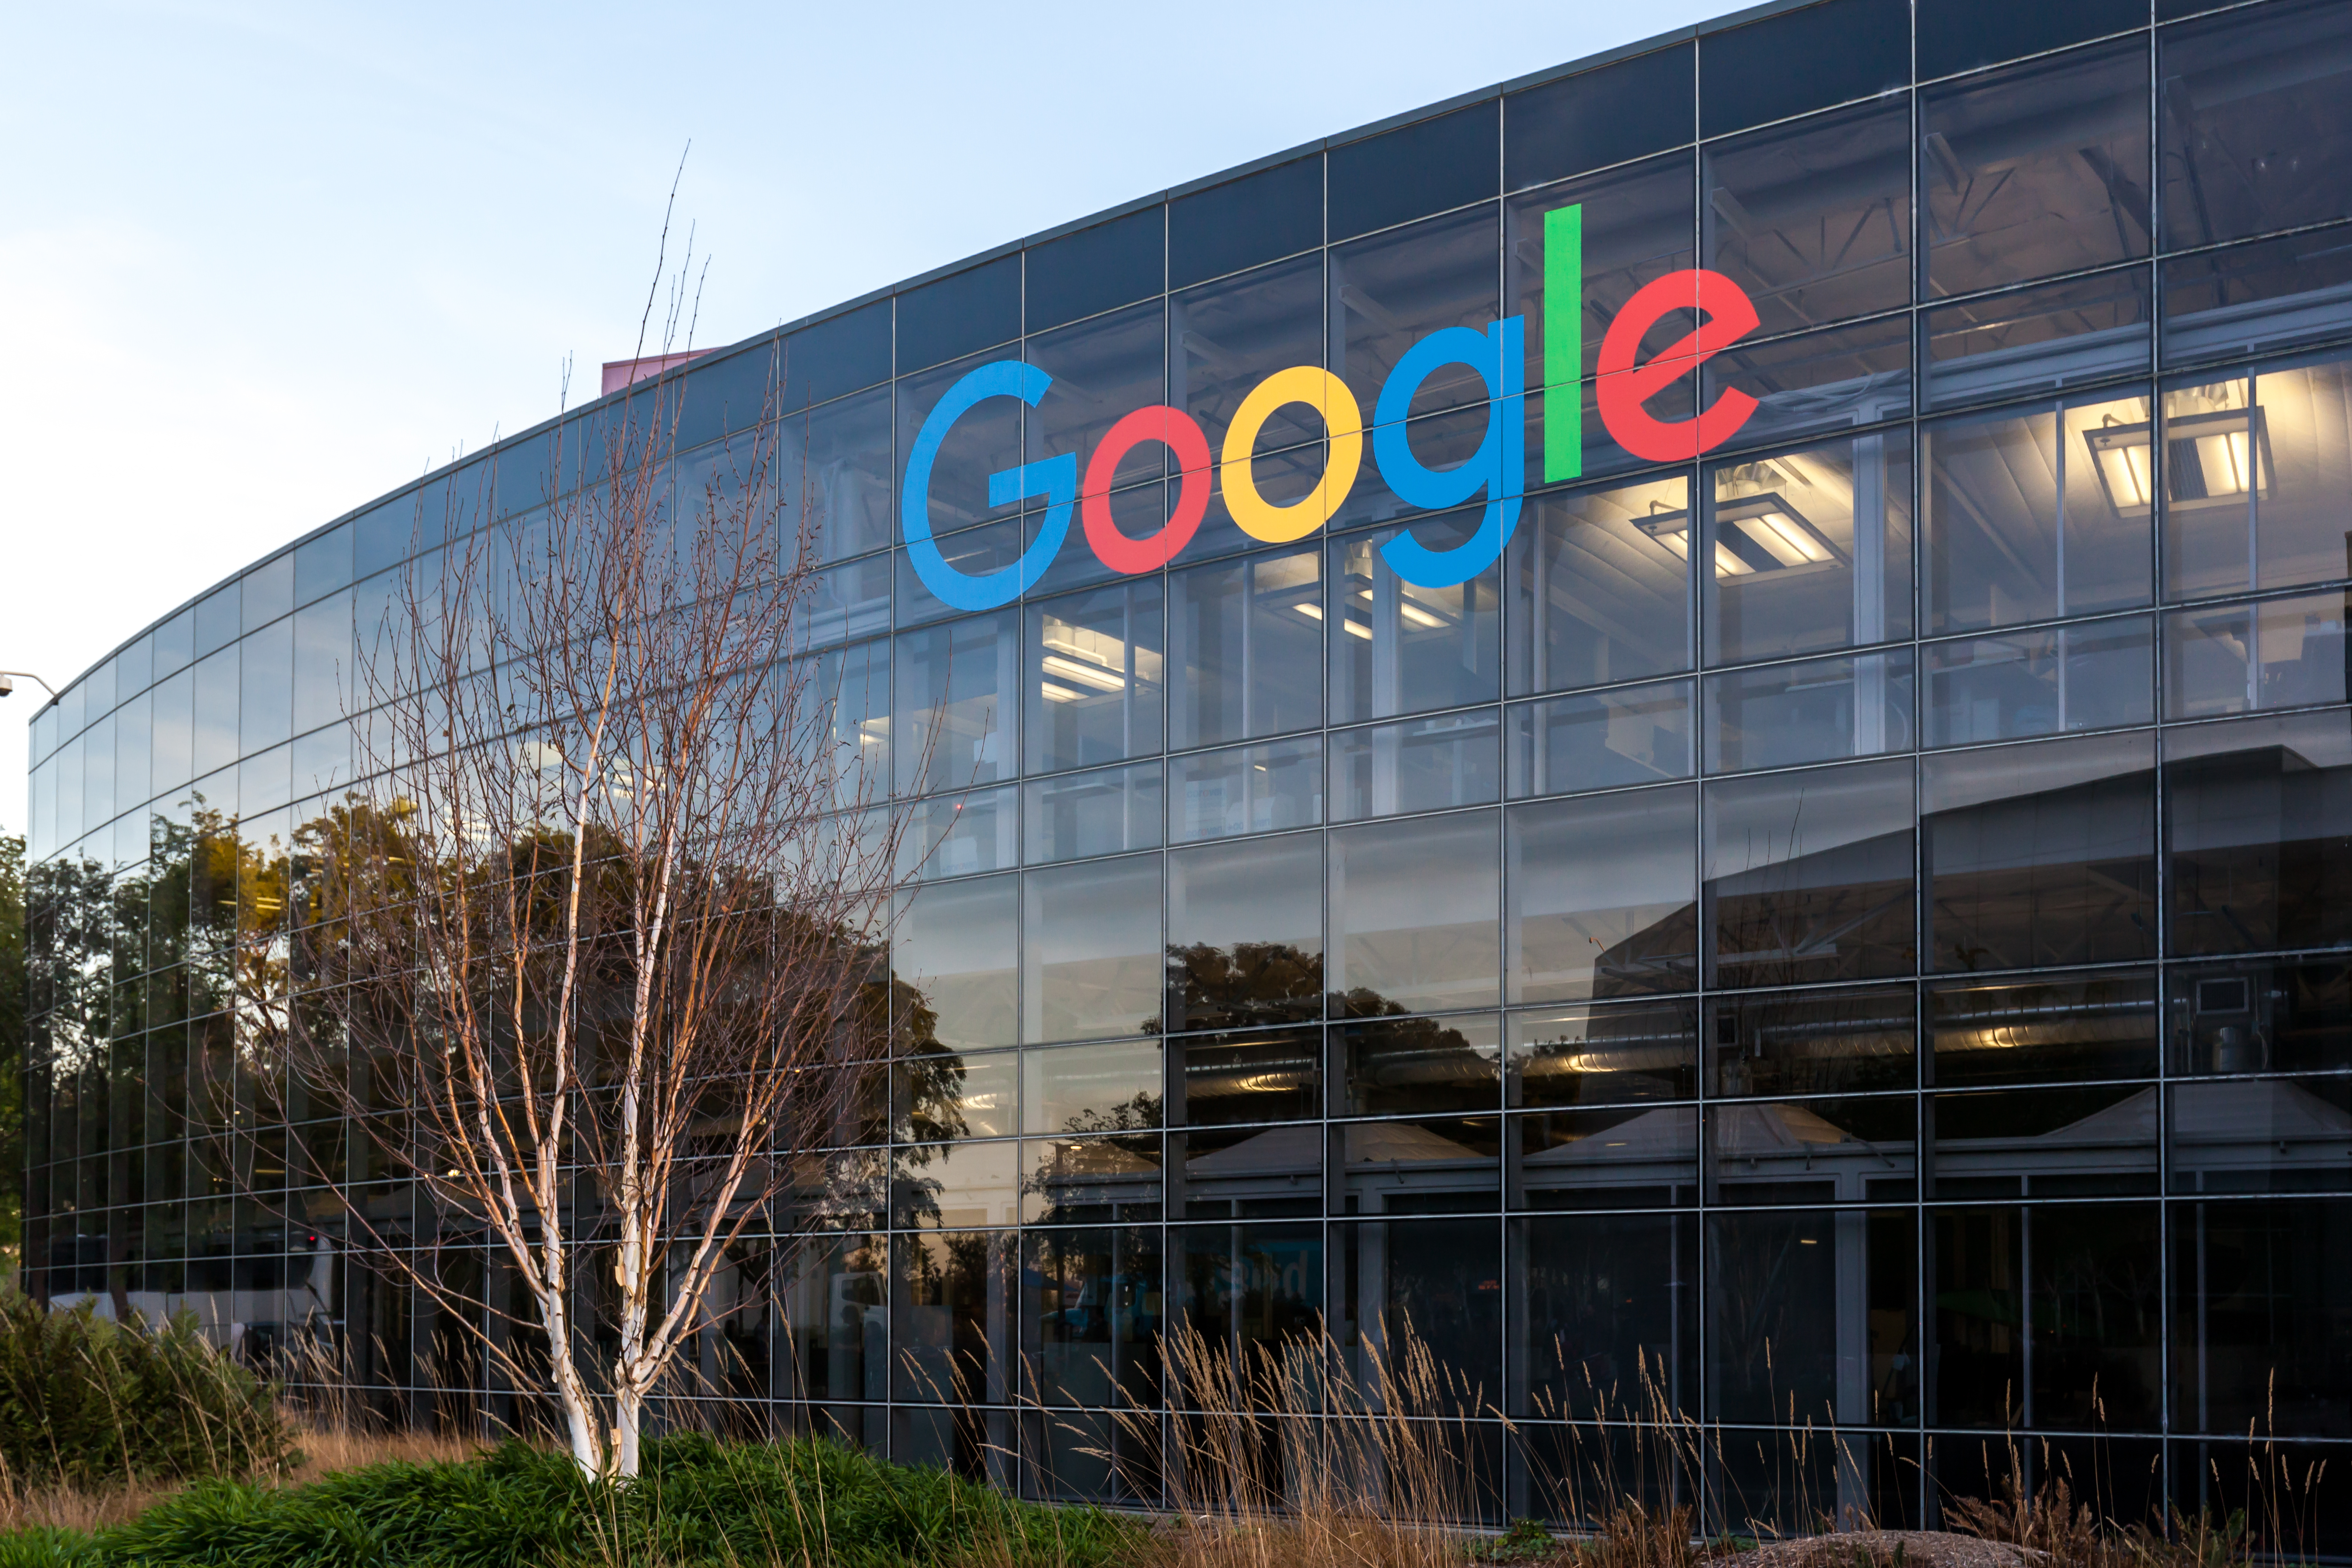 Google faces multibillion-dollar US lawsuit over patent infringement related to AI technology